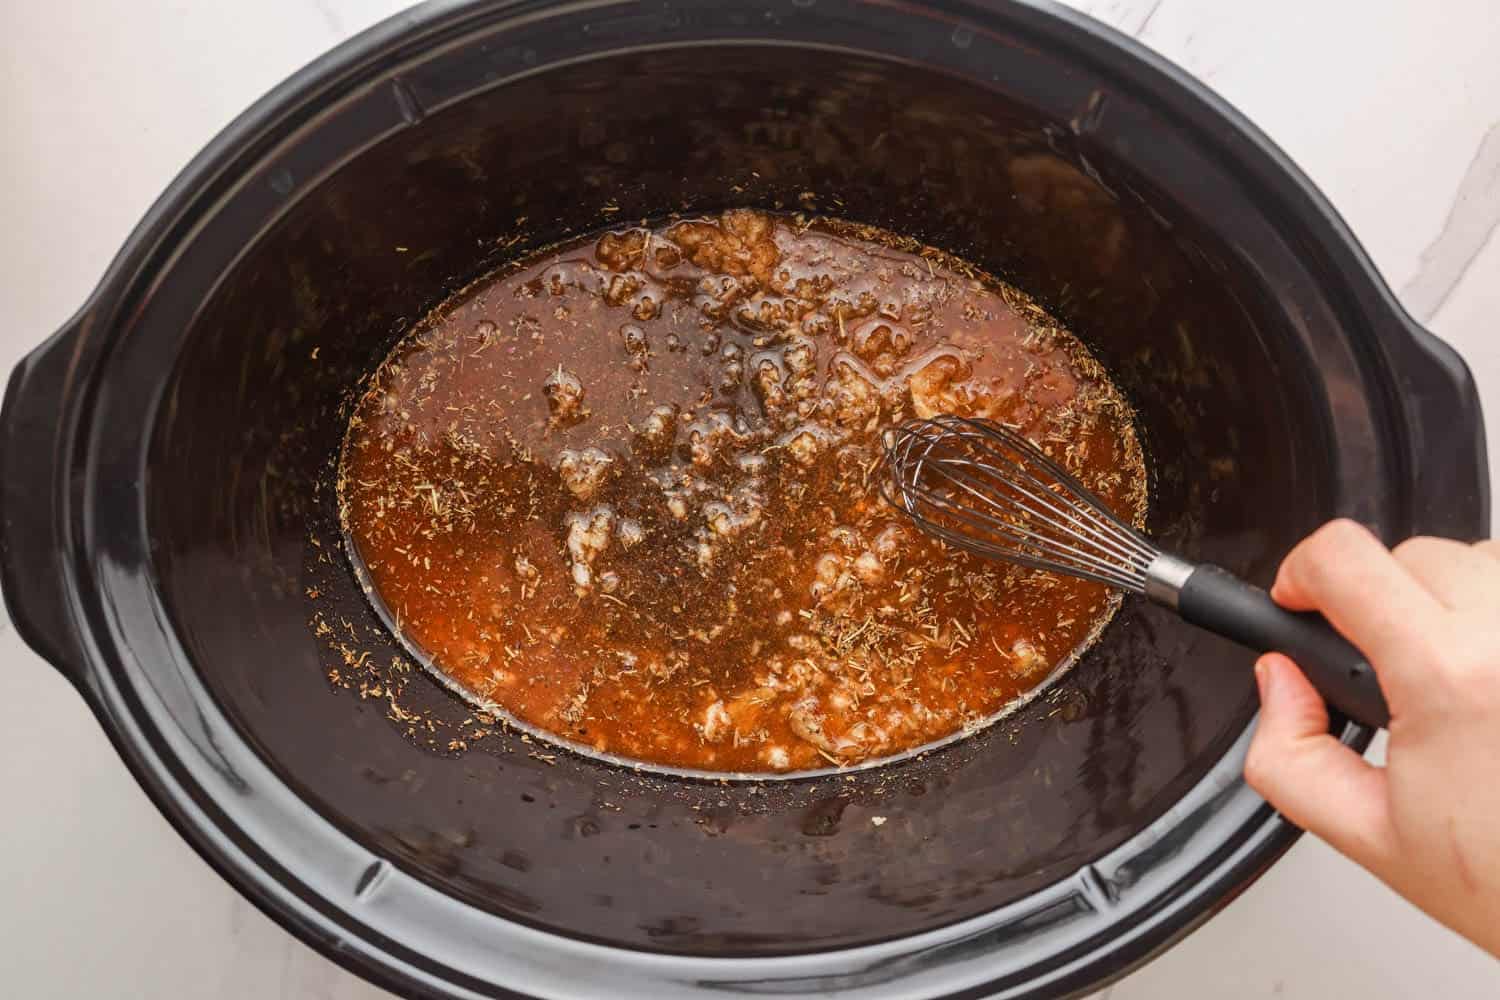 broth with seasonings added to a black slow cooker, stirred with a whisk.